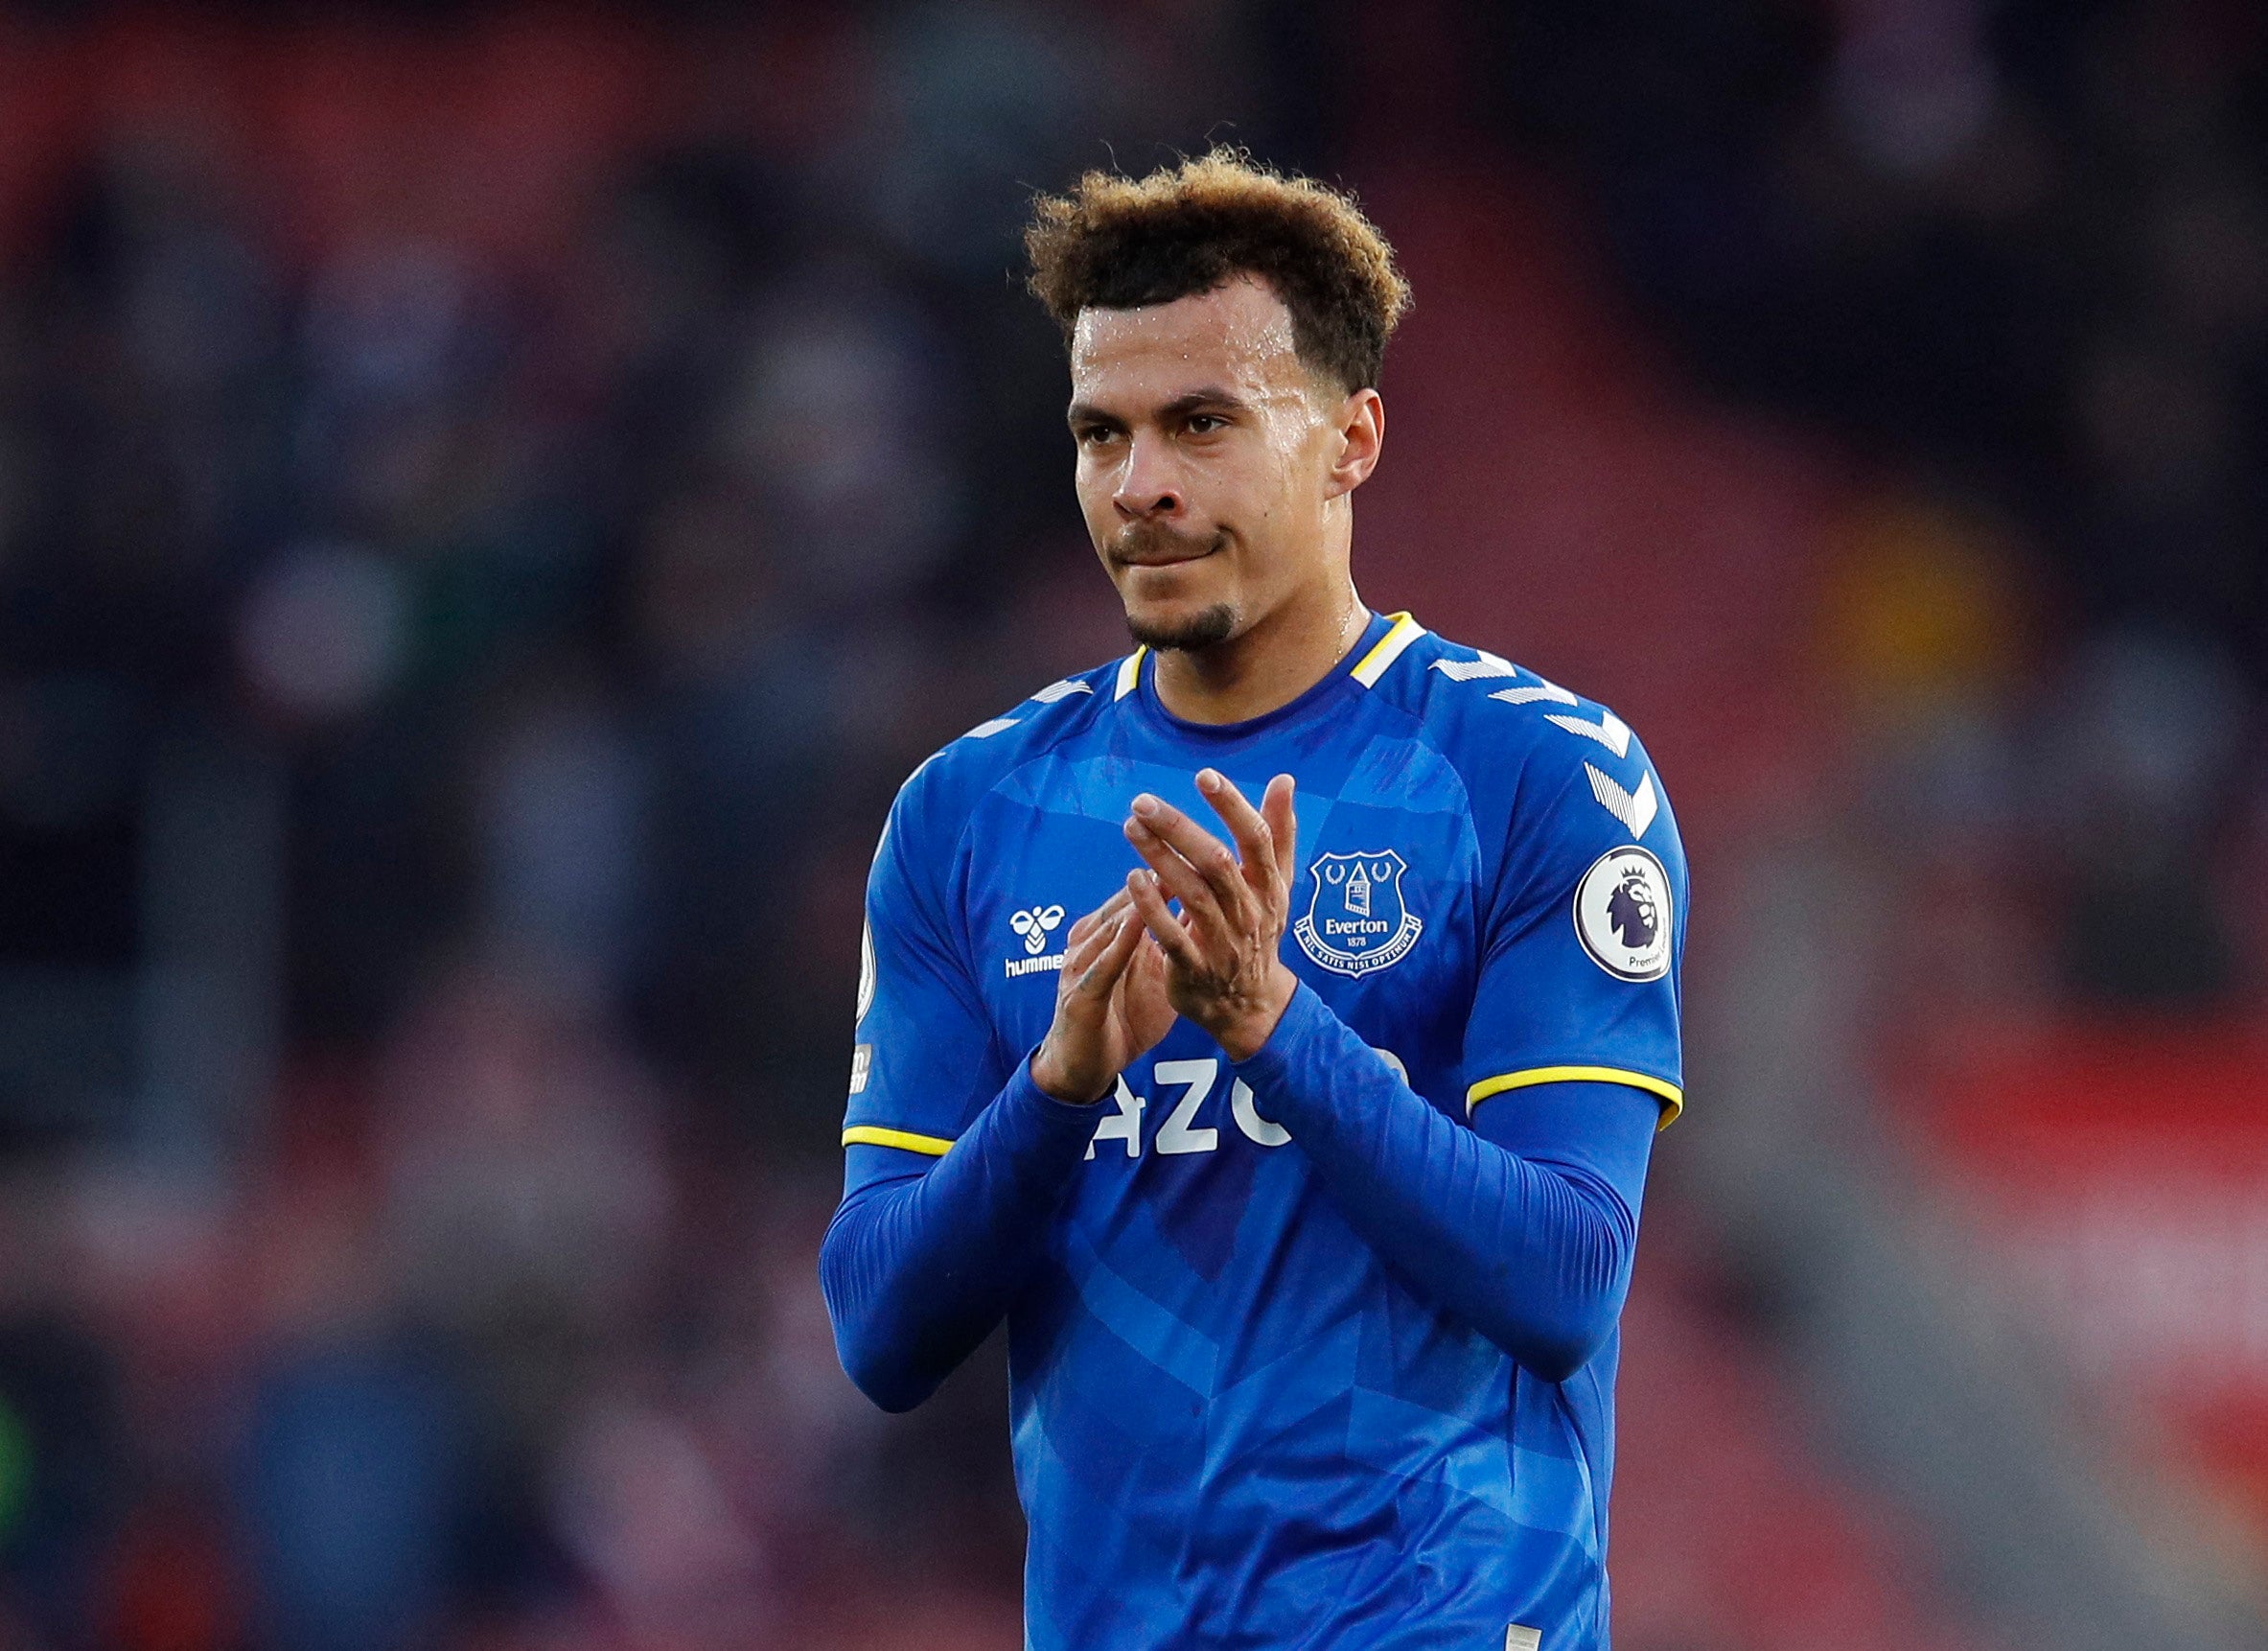 Dele Alli applauds the Everton supporters